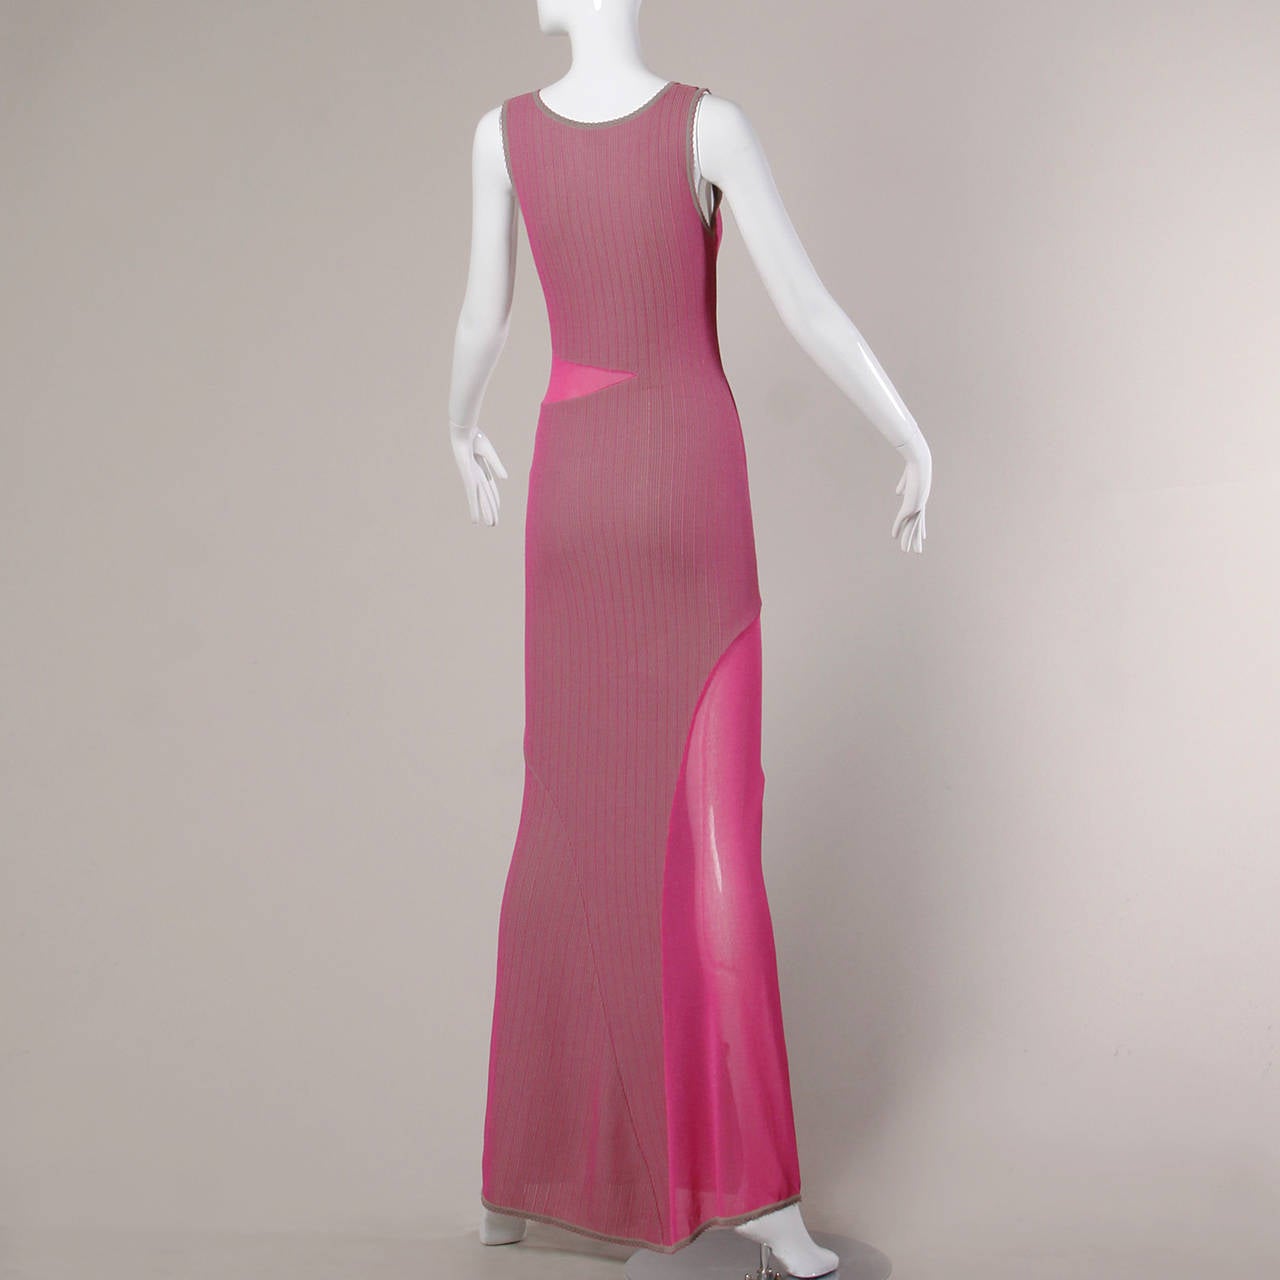 Herve Leger 1990s 90s Pink + Gray Knit Cut Out Sheer Mesh Bandage Maxi Dress For Sale 2